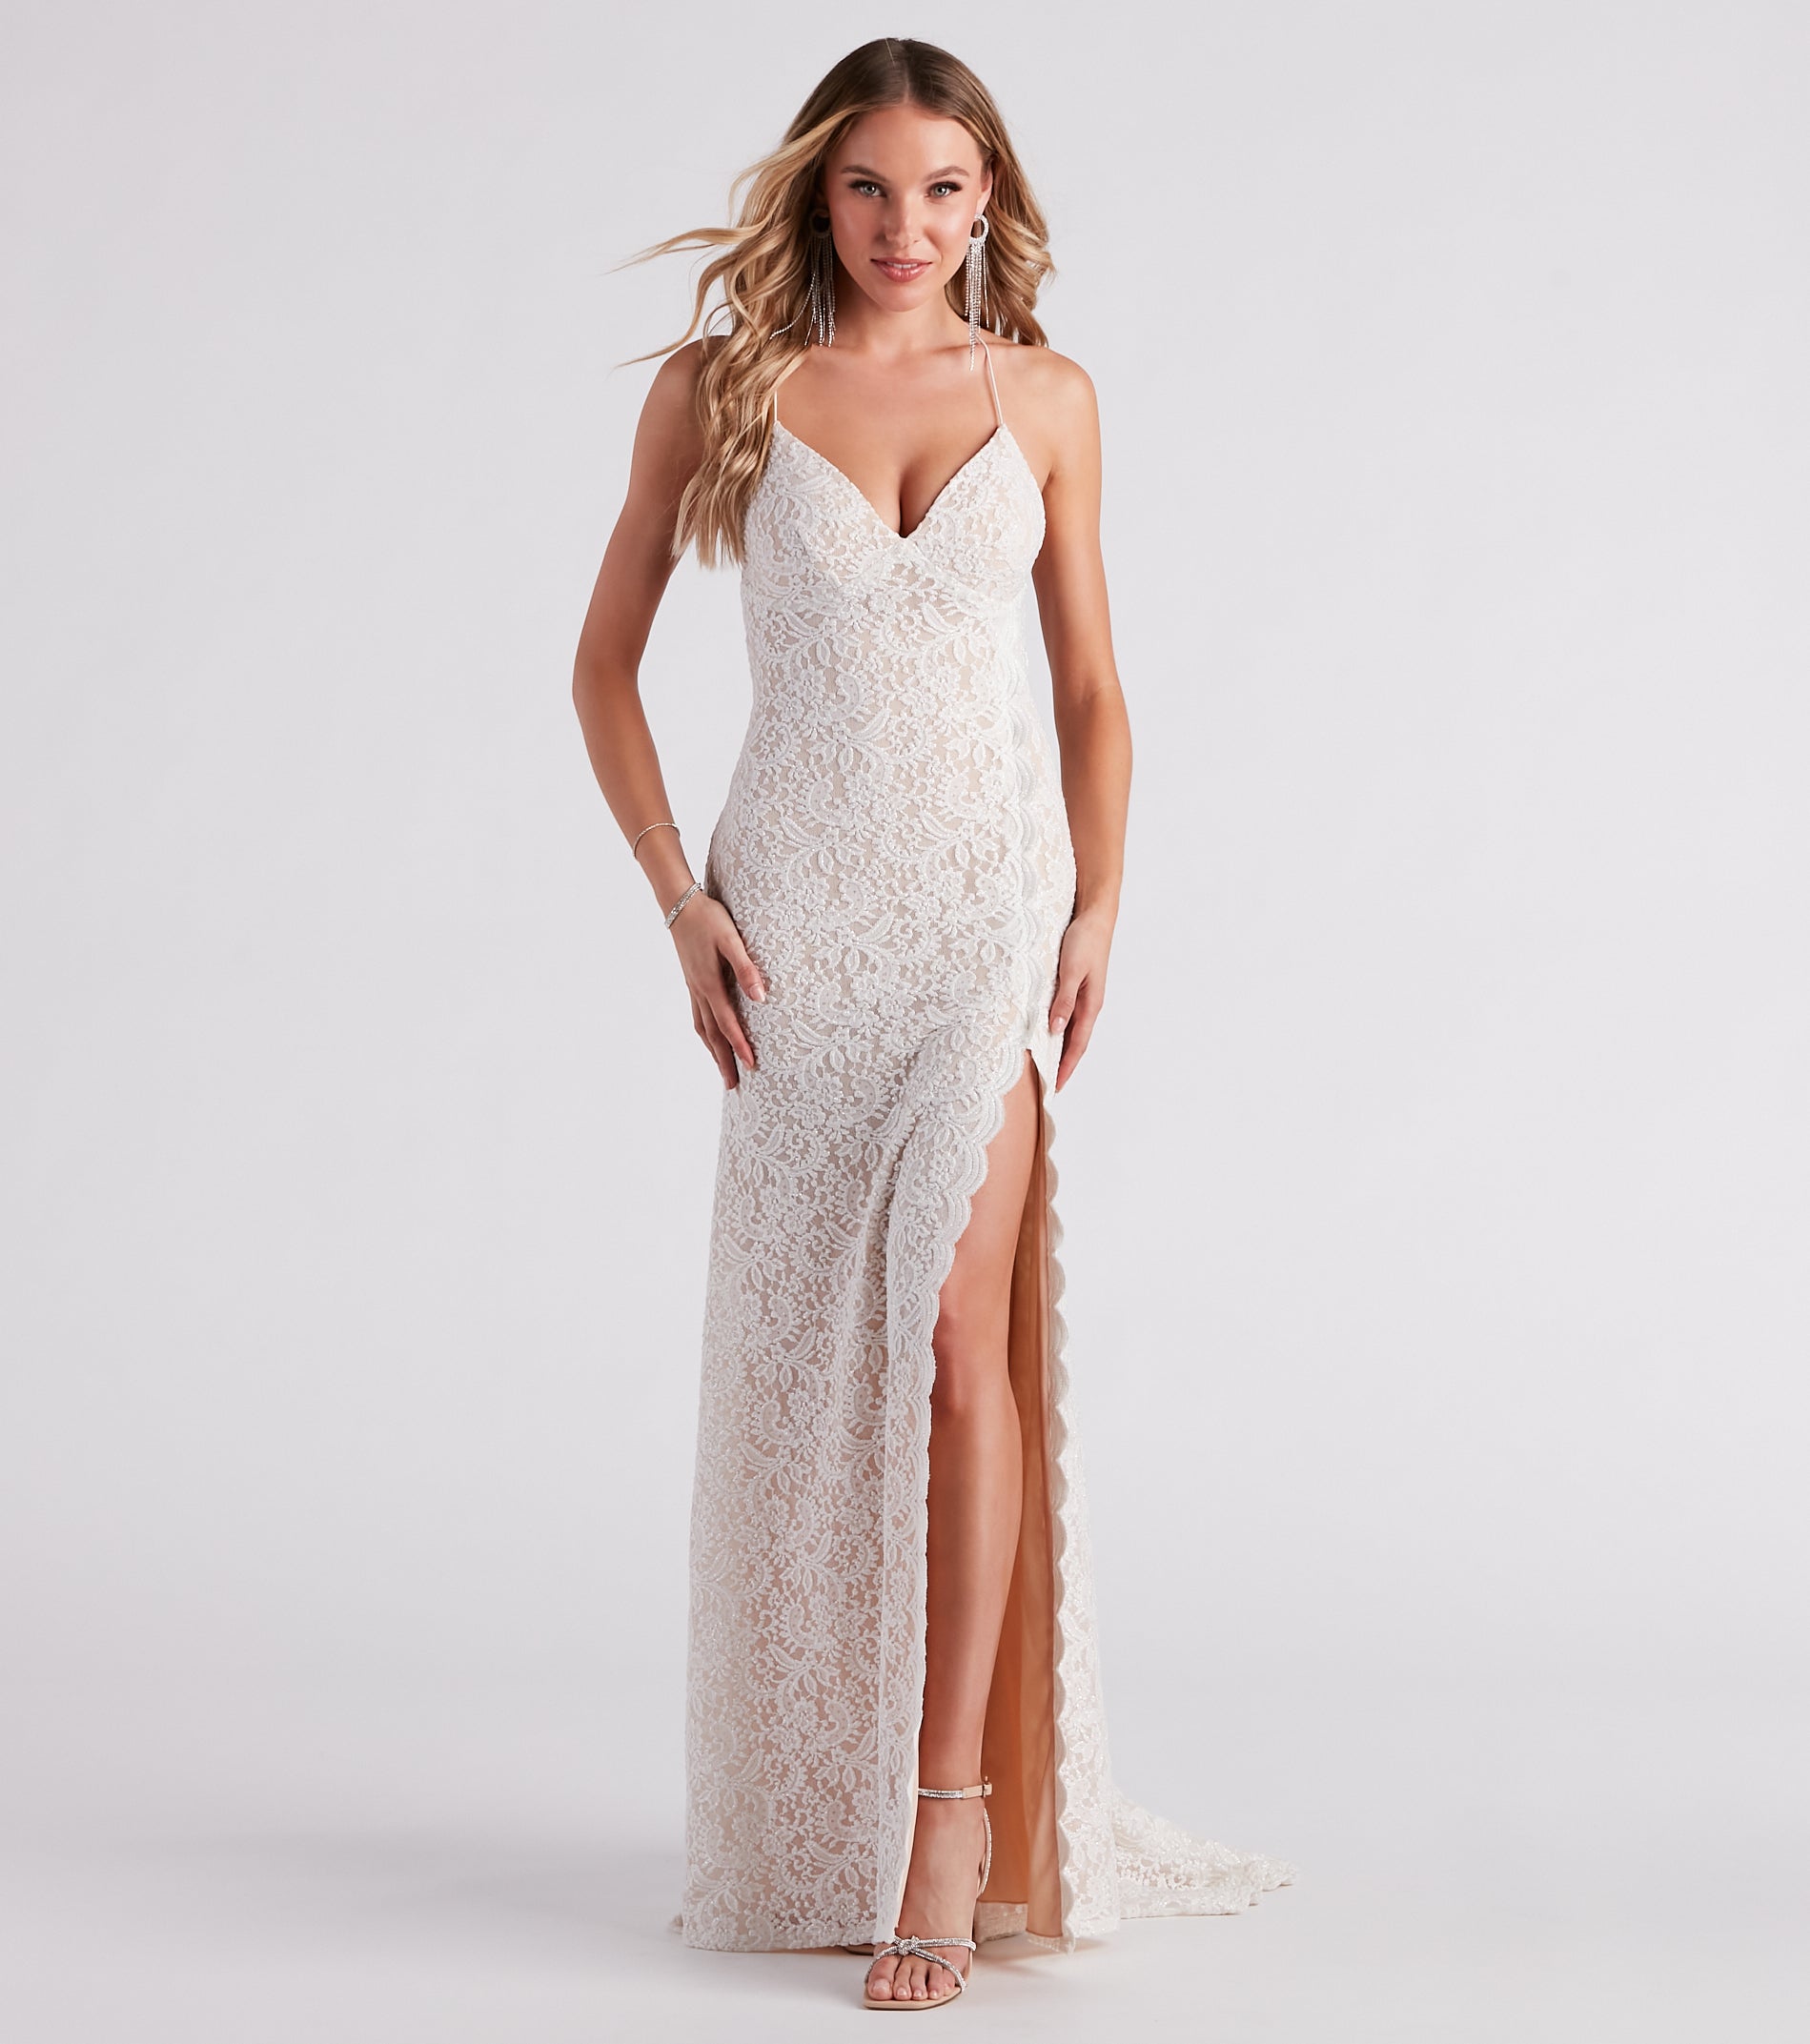 Cora Lace V-Neck Mermaid Ball Gown